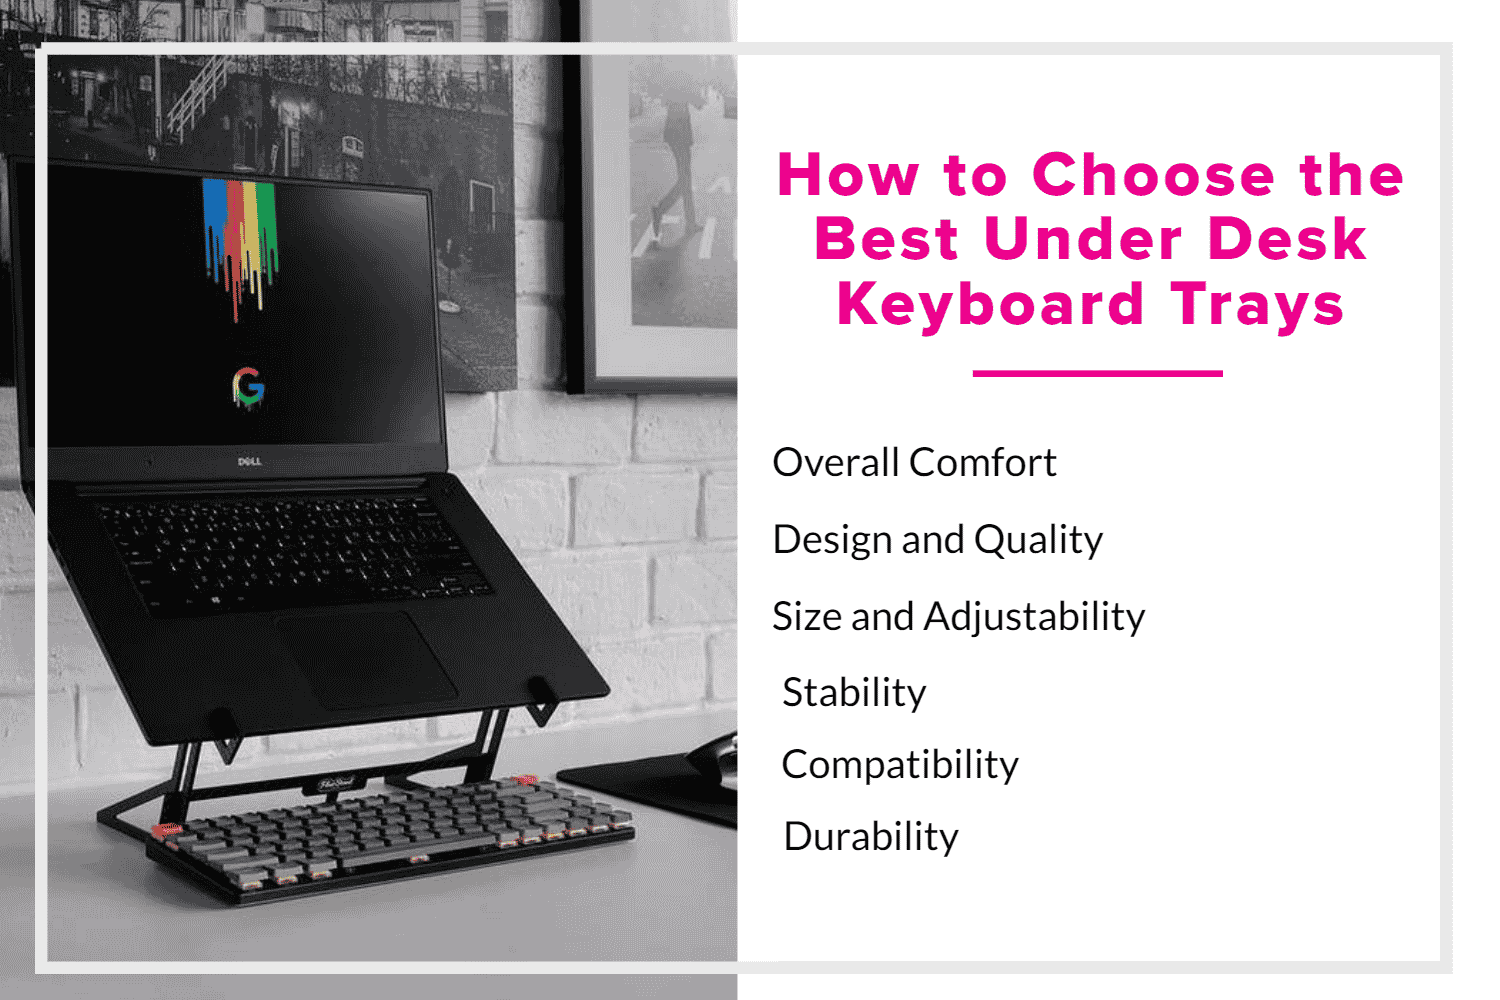 How to Choose the Best Under Desk Keyboard Trays